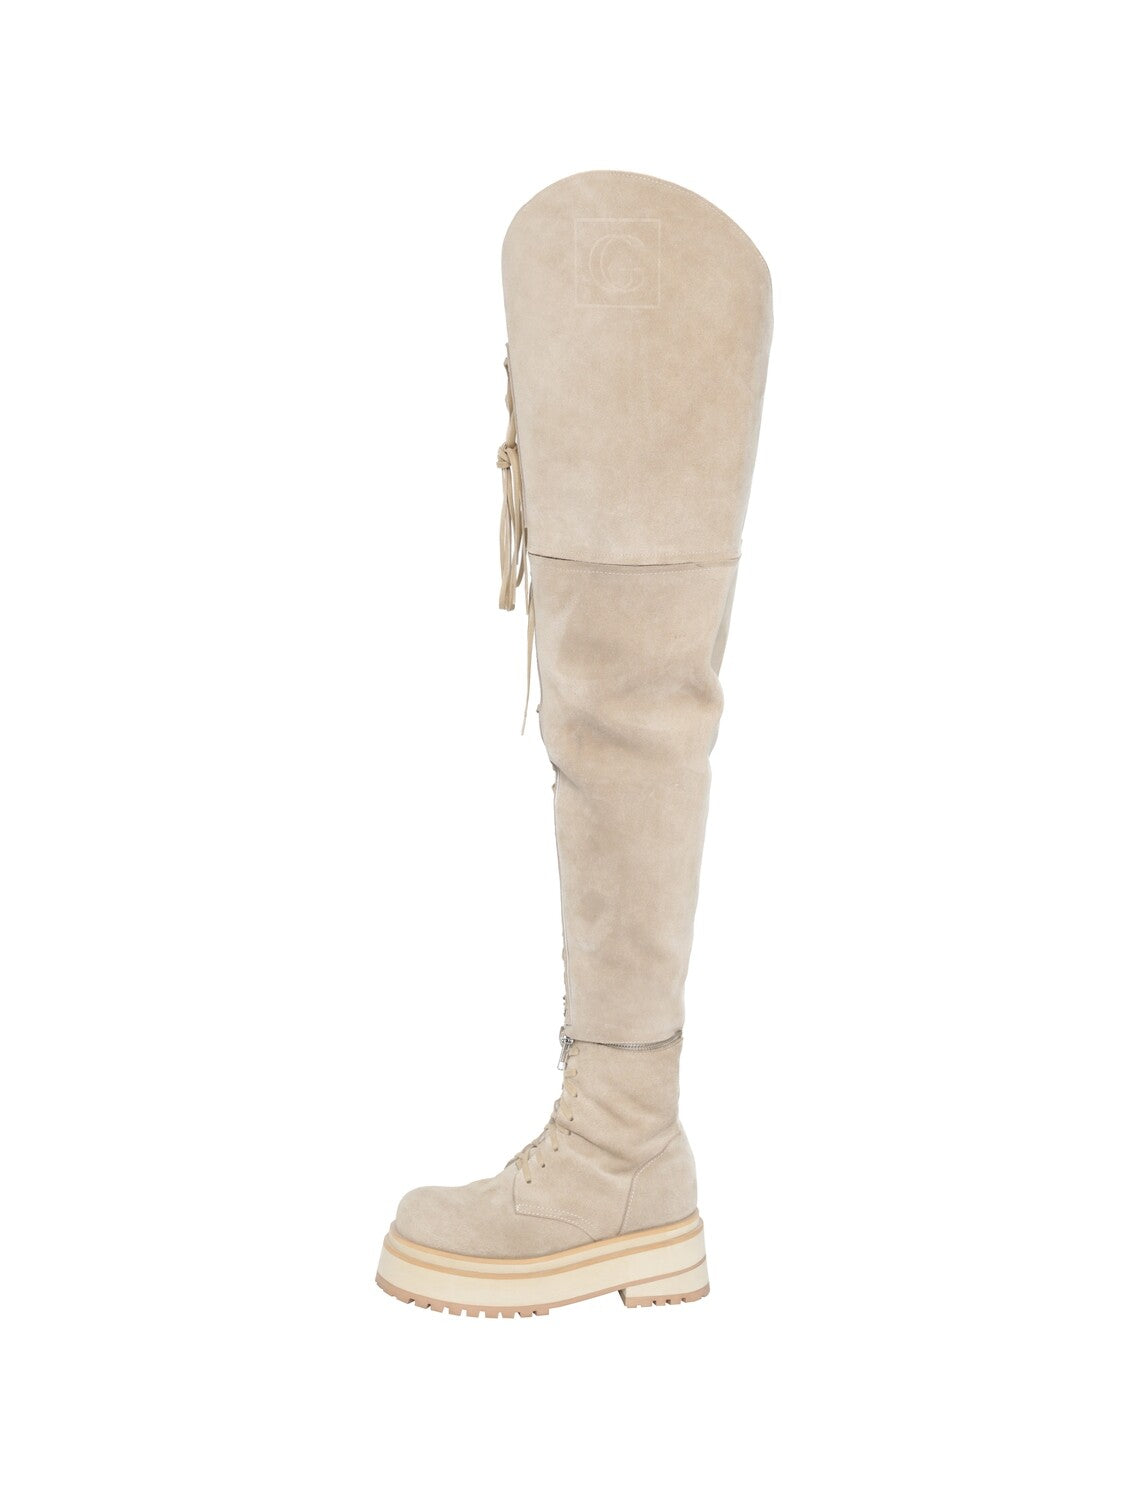 Boots transformers beige, 3rd height